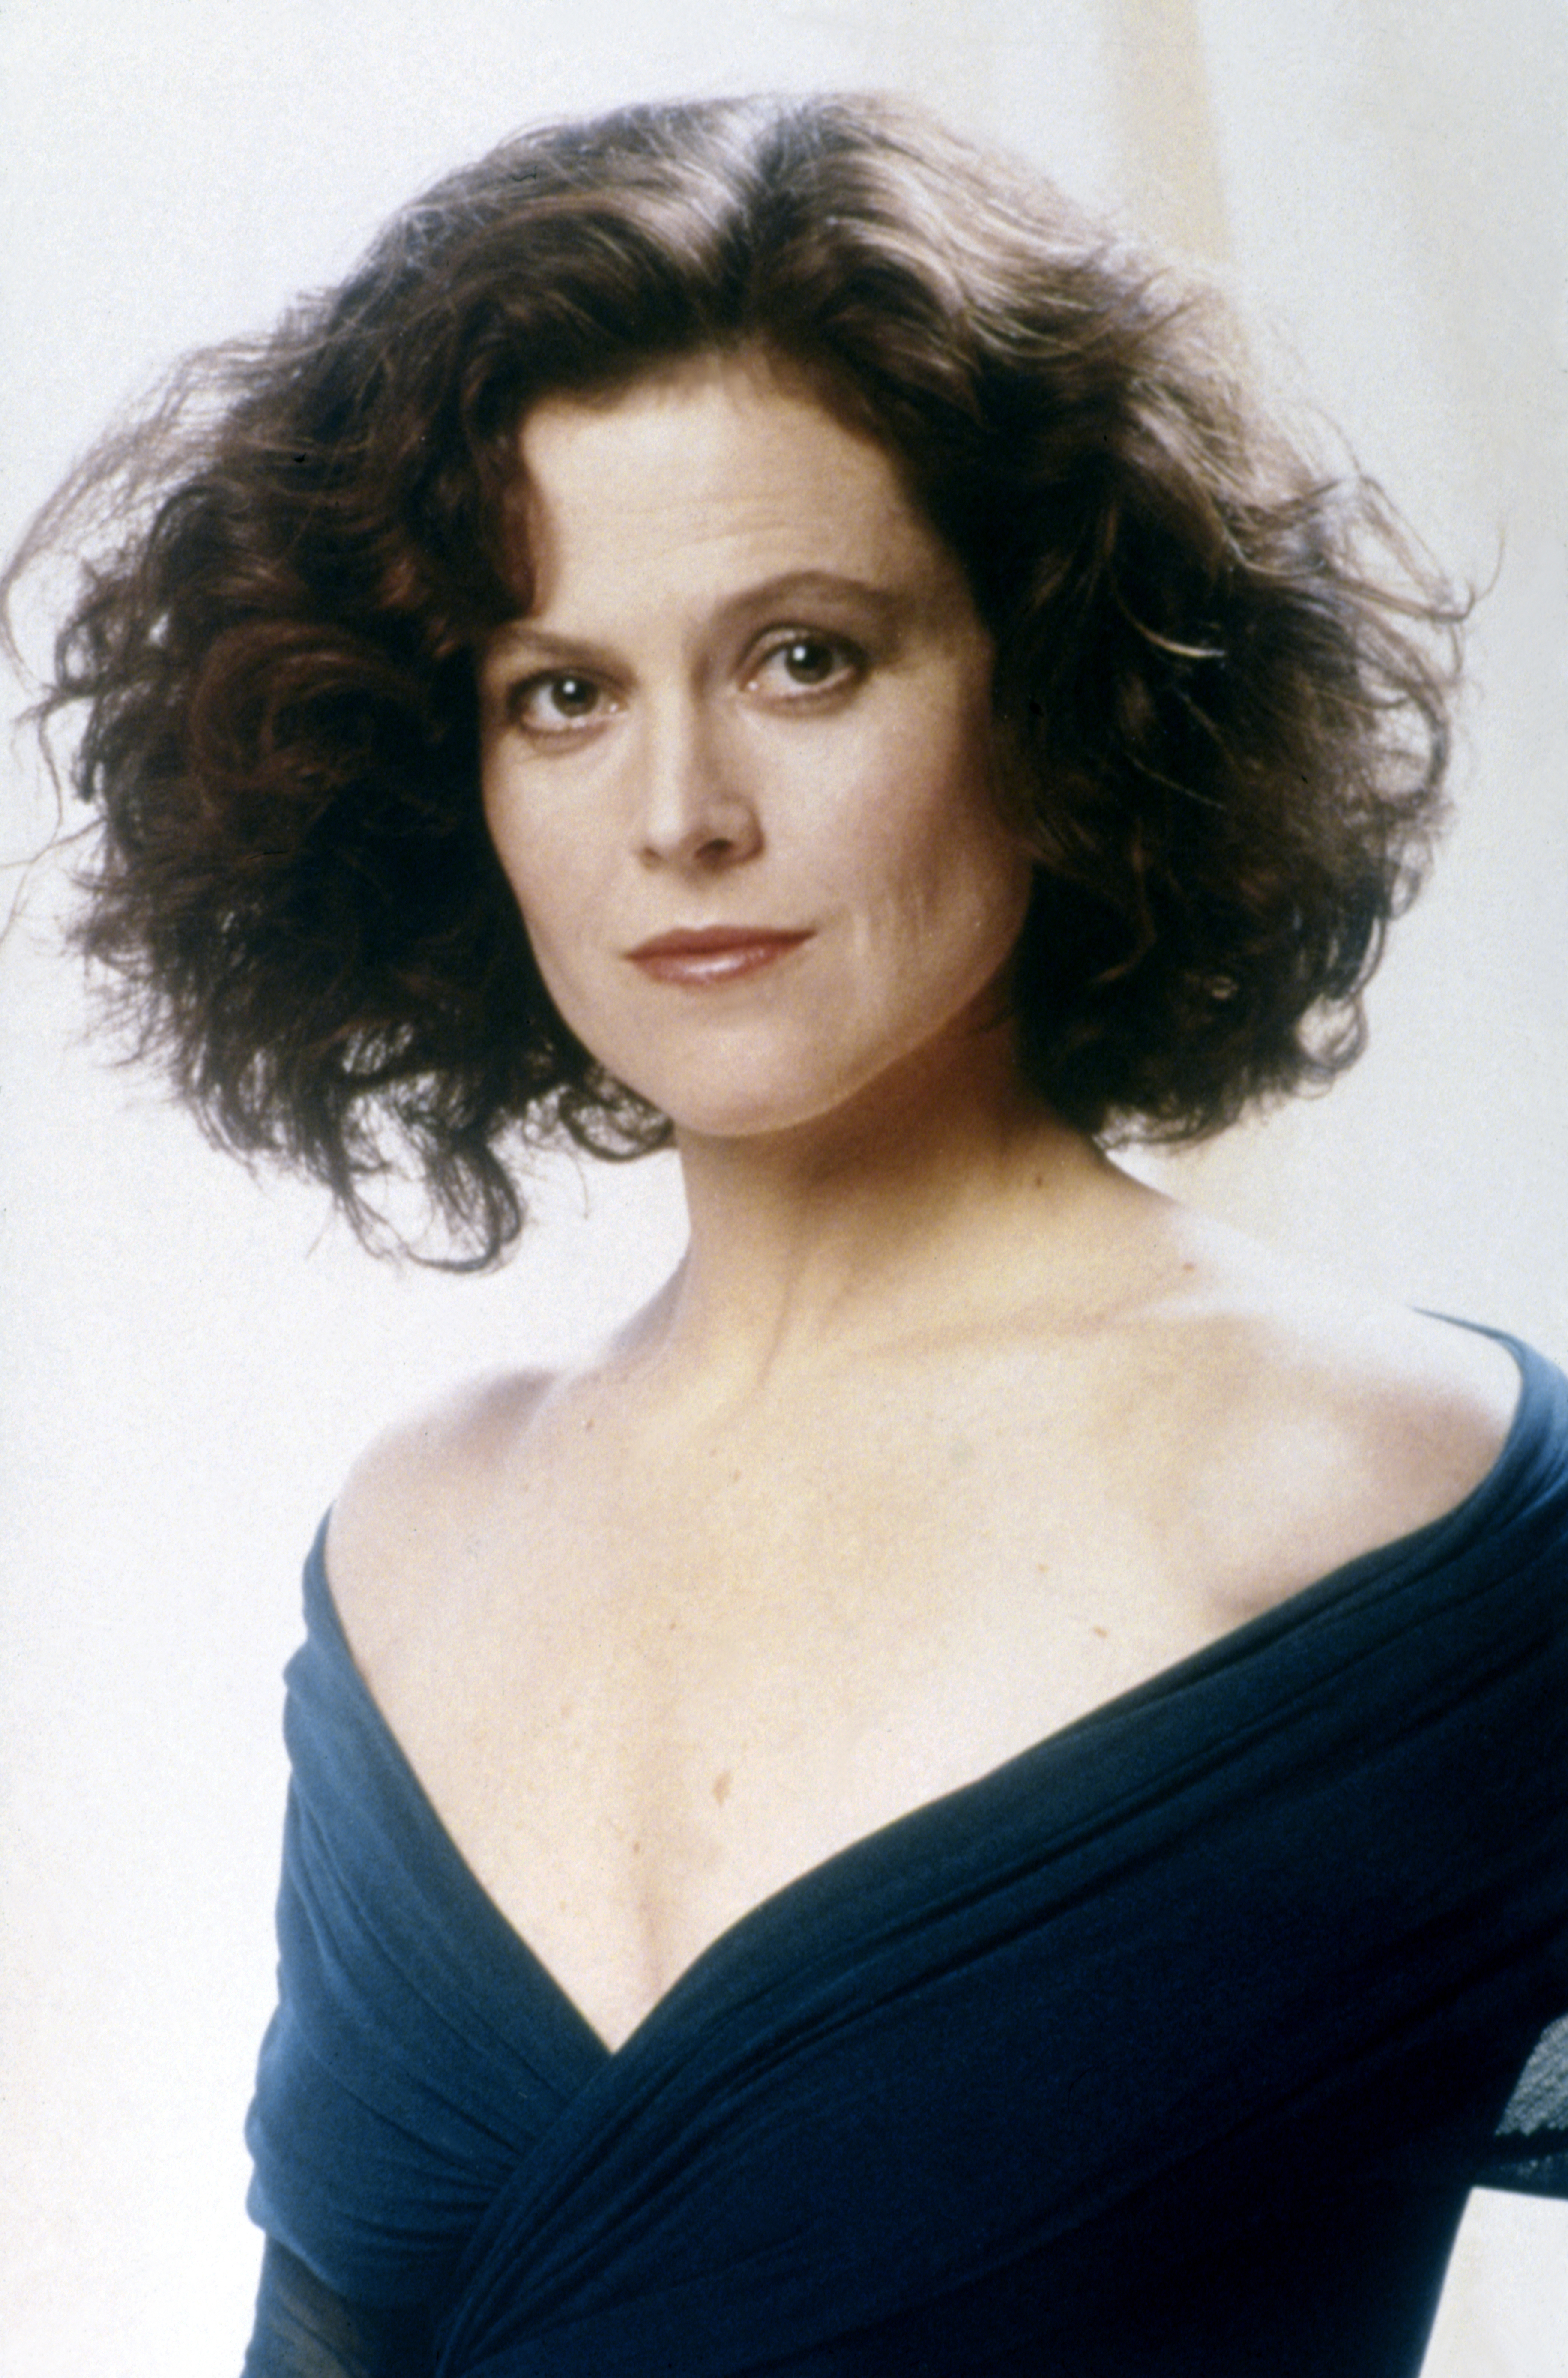 Sigourney Weaver at an event for Ghostbusters II (1989)